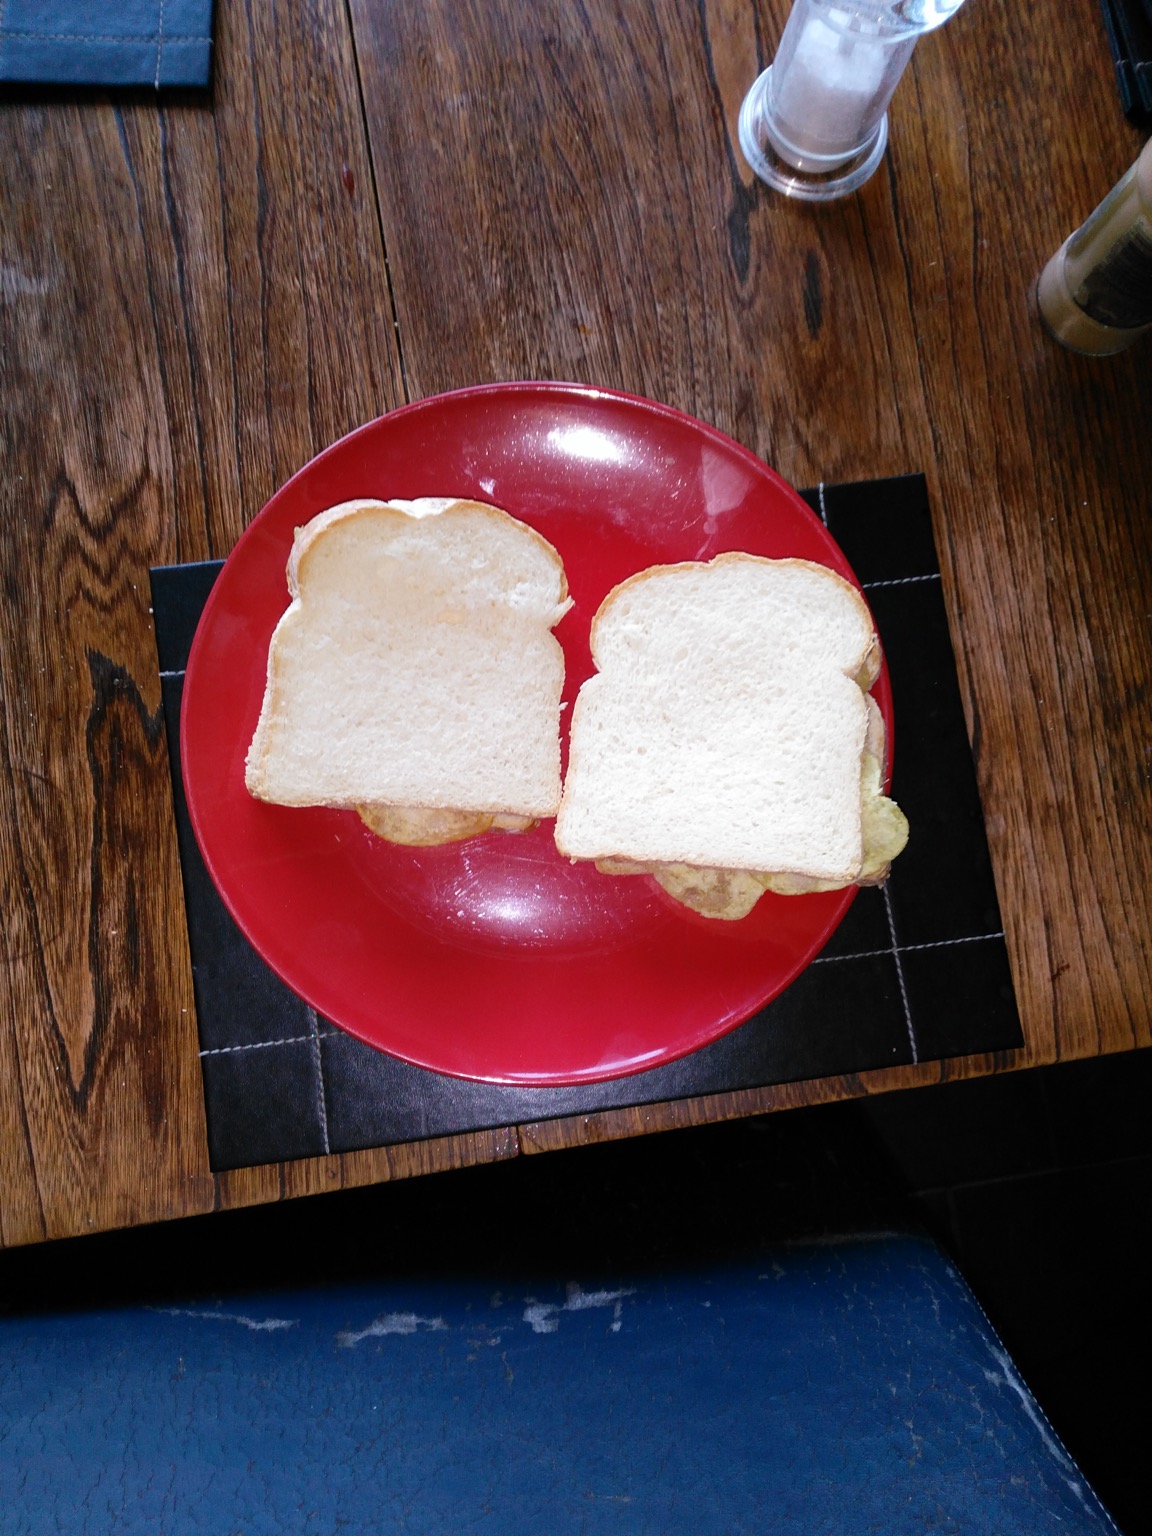 Overhead view of two crisp sandwiches